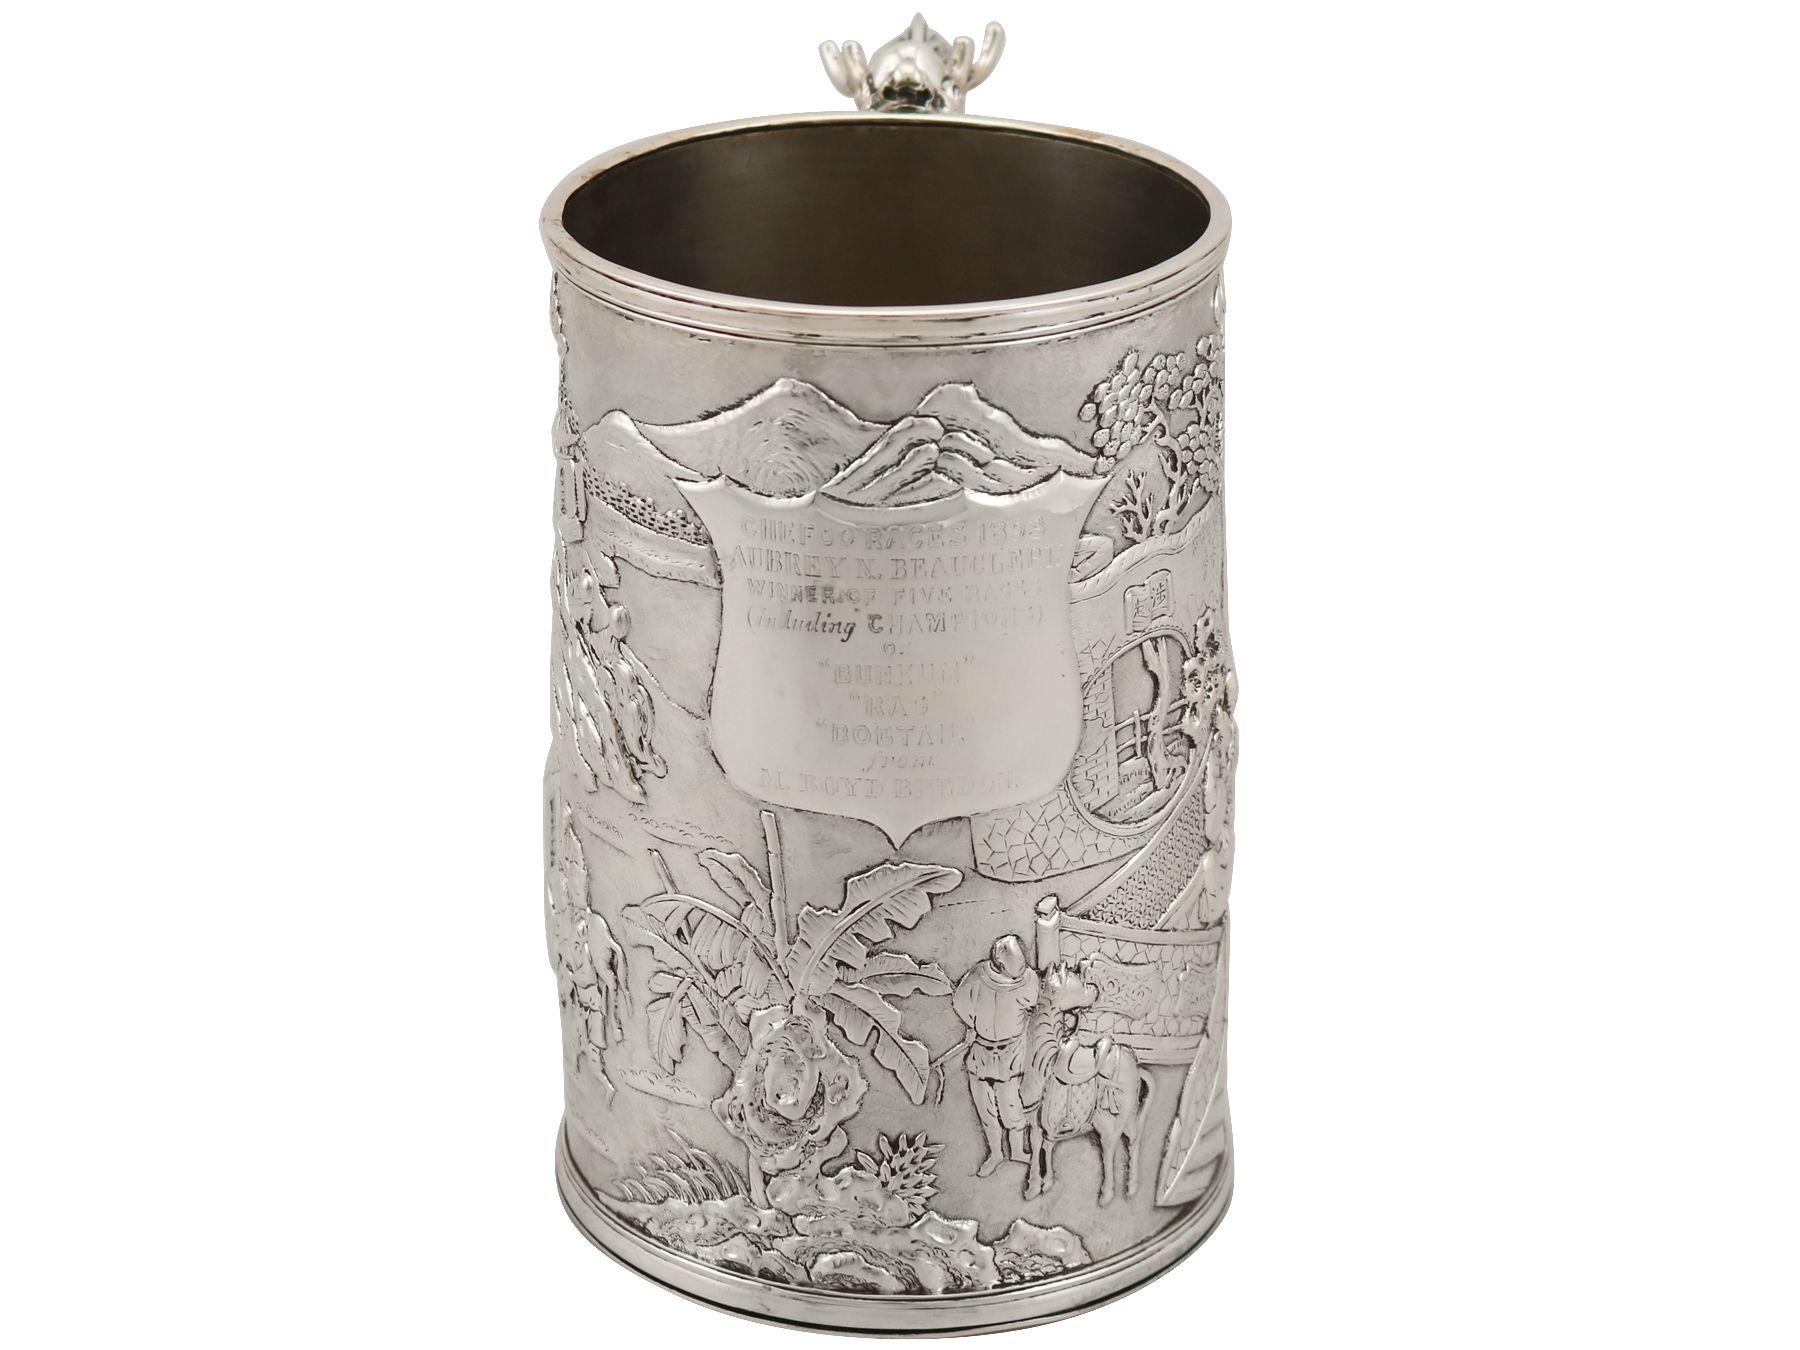 Early 20th Century Chinese Export Silver Mug Antique, Circa 1900